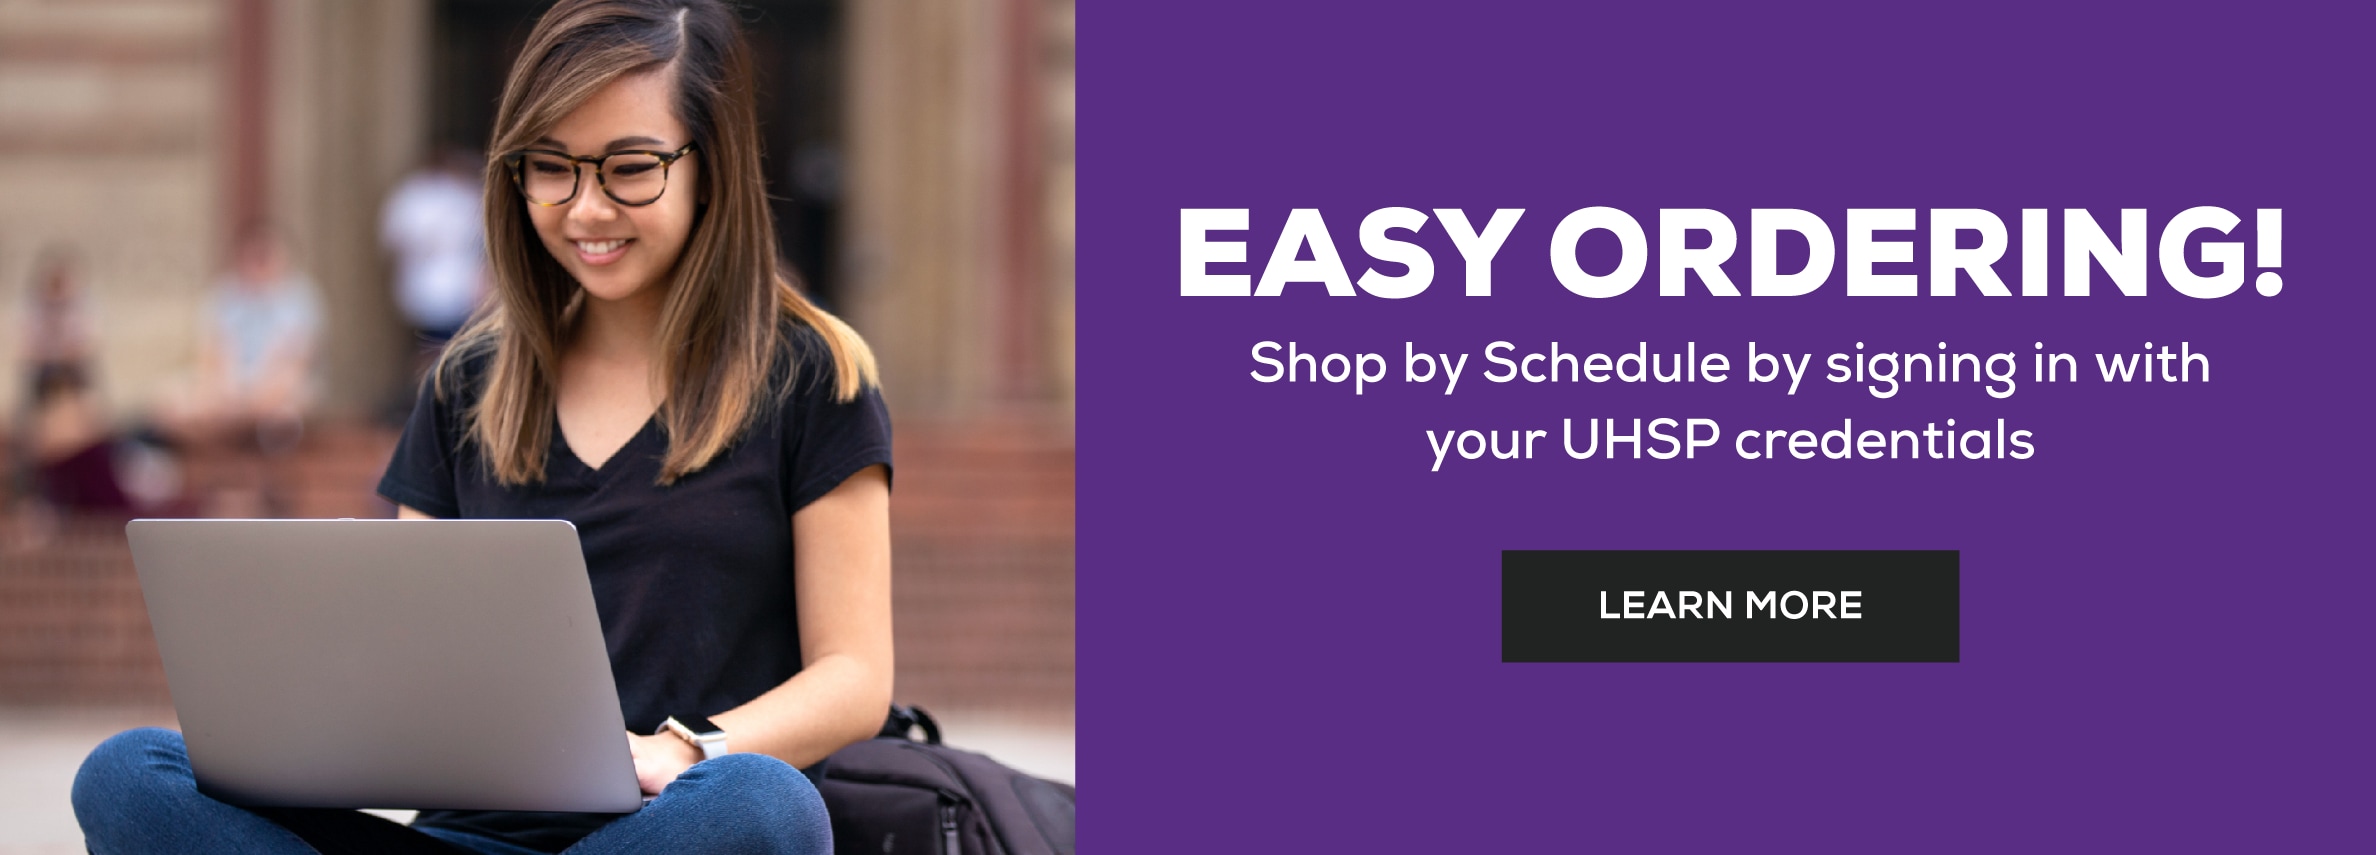 EASY ORDERING! Shop by schedule by signing in with your UHSP credentials! Learn More.